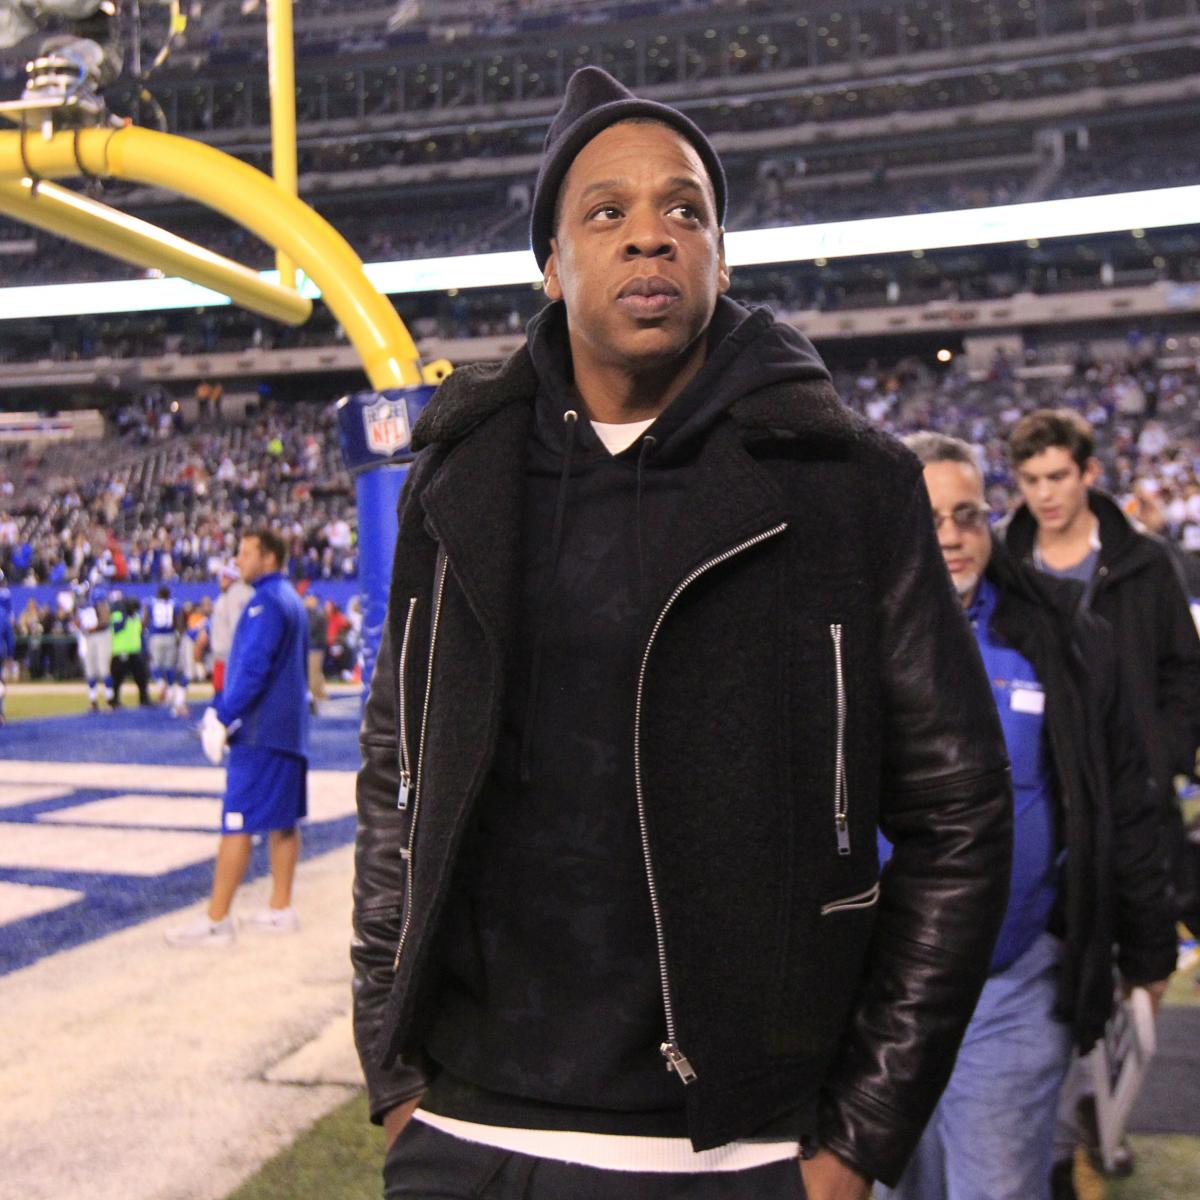 NFL, Jay-Z, Roc Nation to Form Entertainment, Social Justice